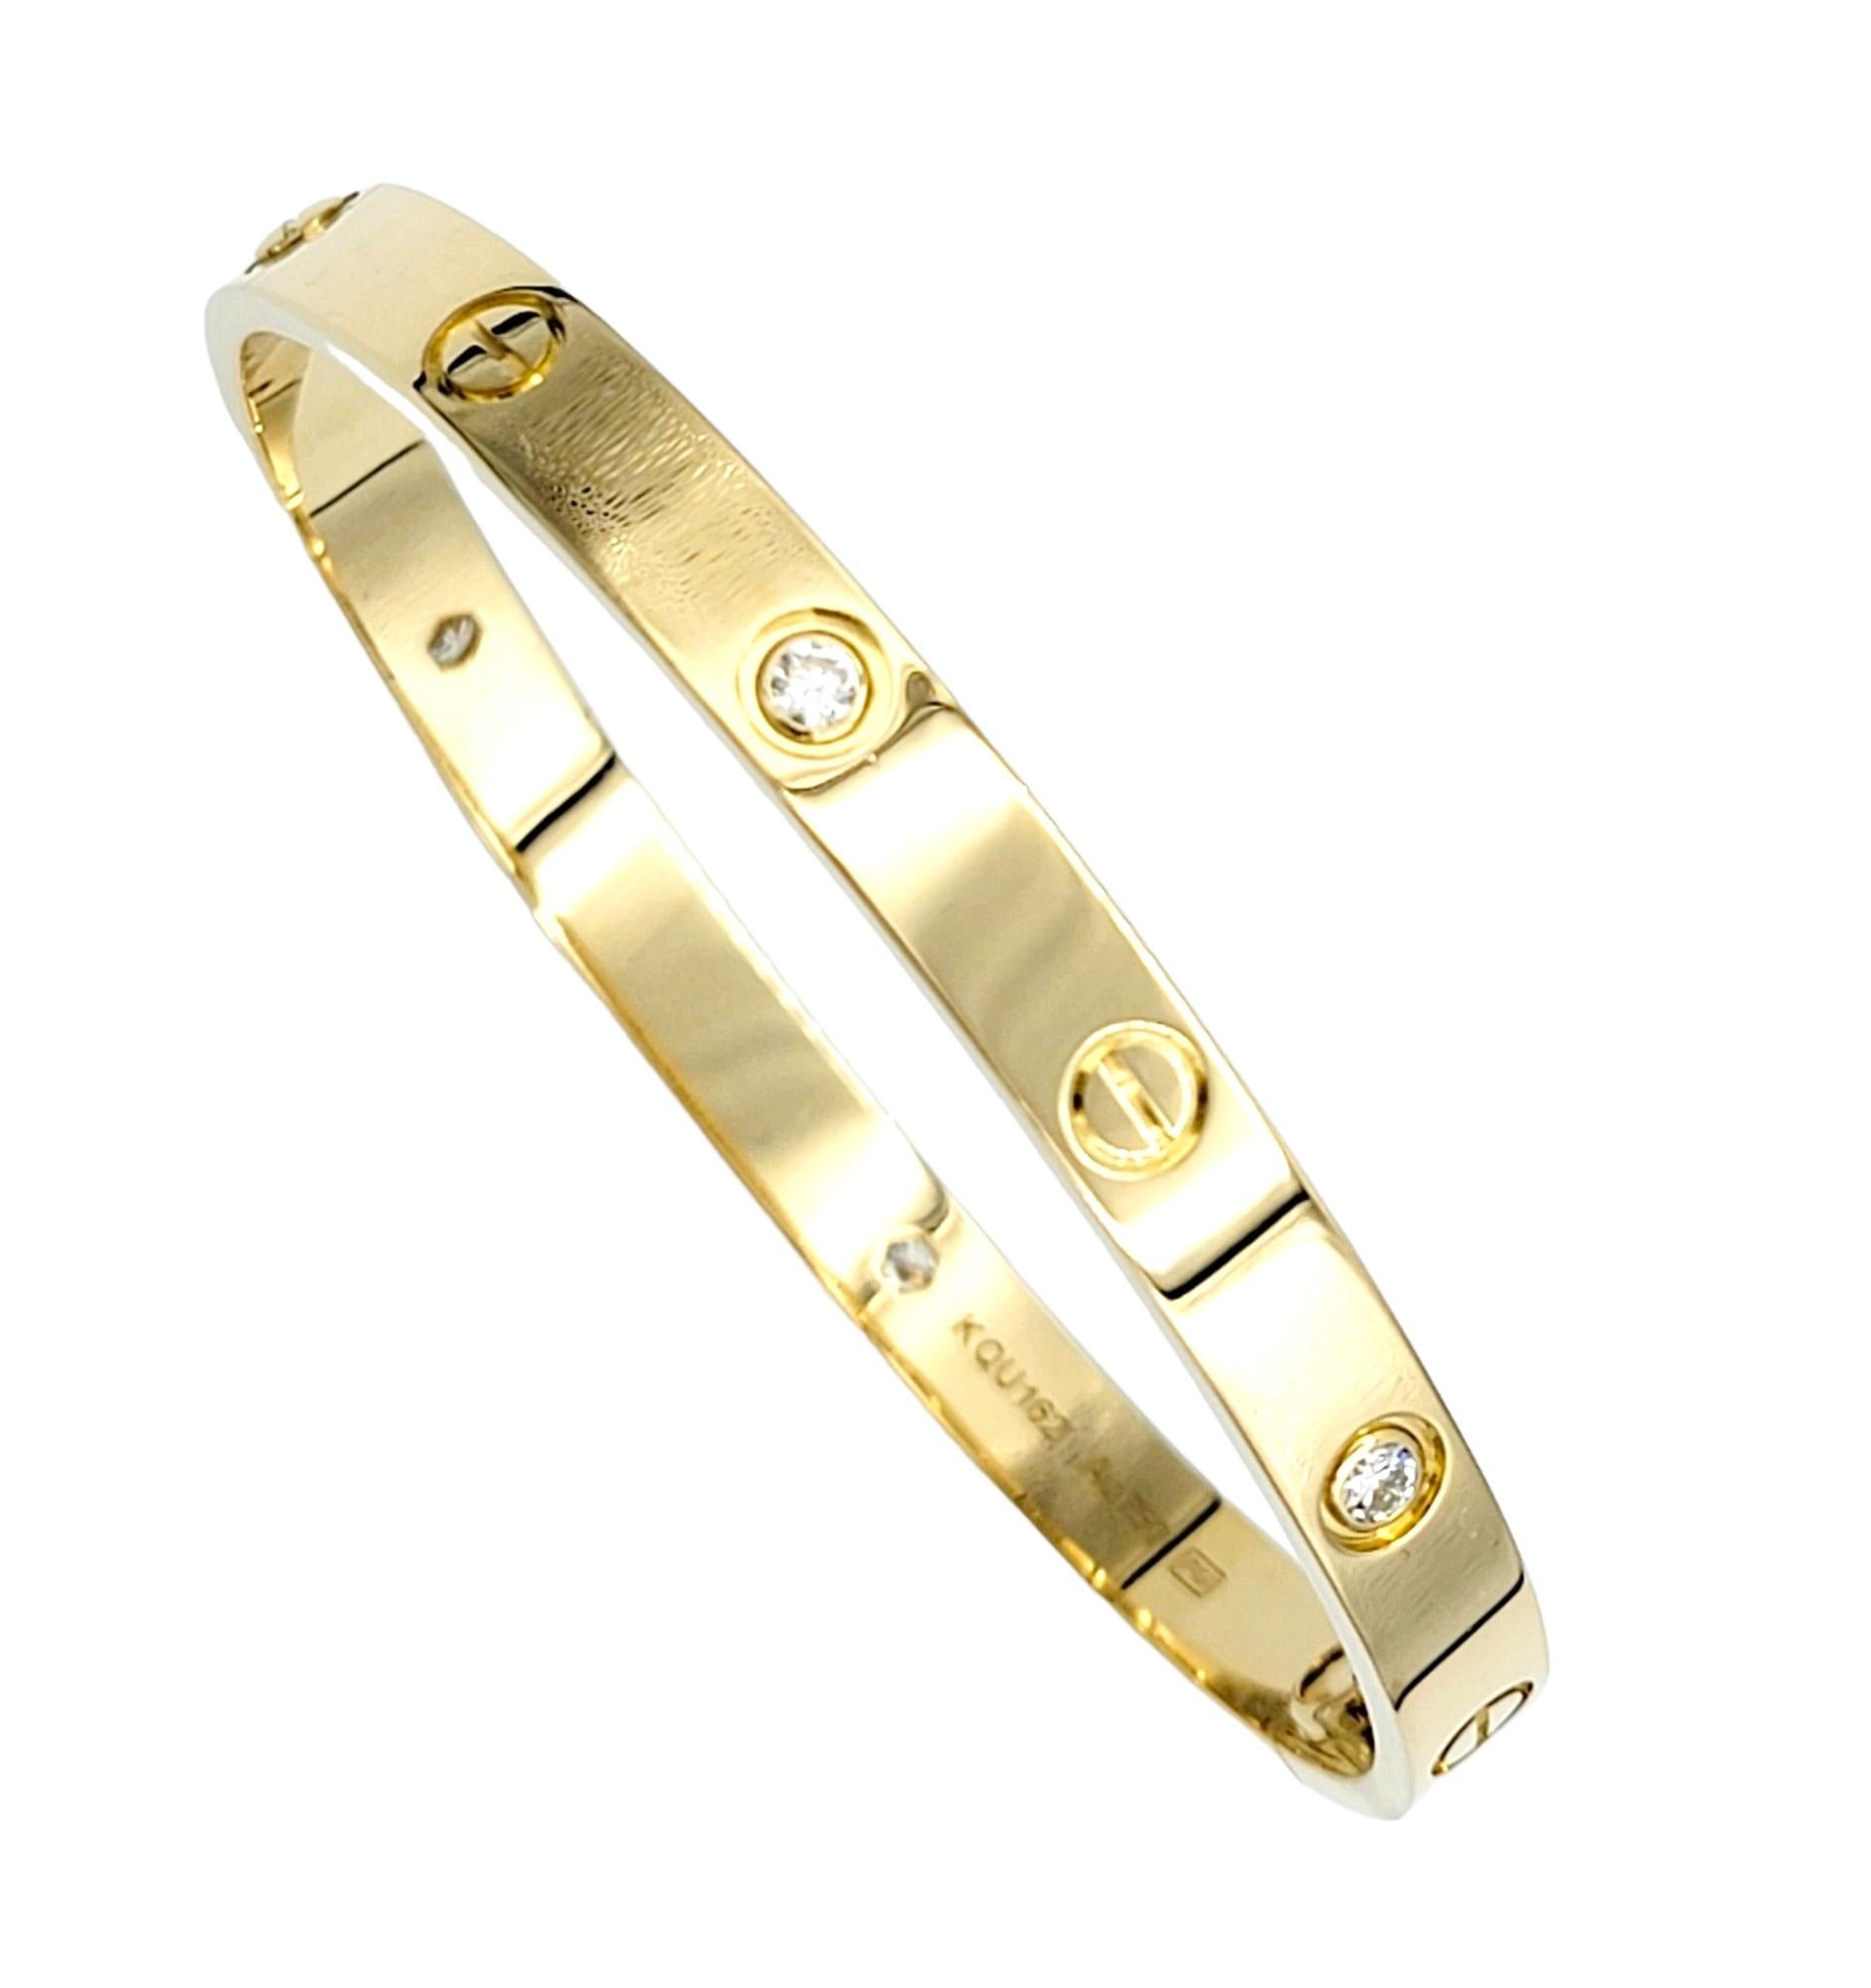 Iconic Love Collection bangle bracelet with diamonds from luxury jeweler, Cartier. Includes box, outer box, and screwdriver. This simple, yet effortlessly timeless piece makes a chic statement on the wrist. With its clean lines, perfect symmetry,